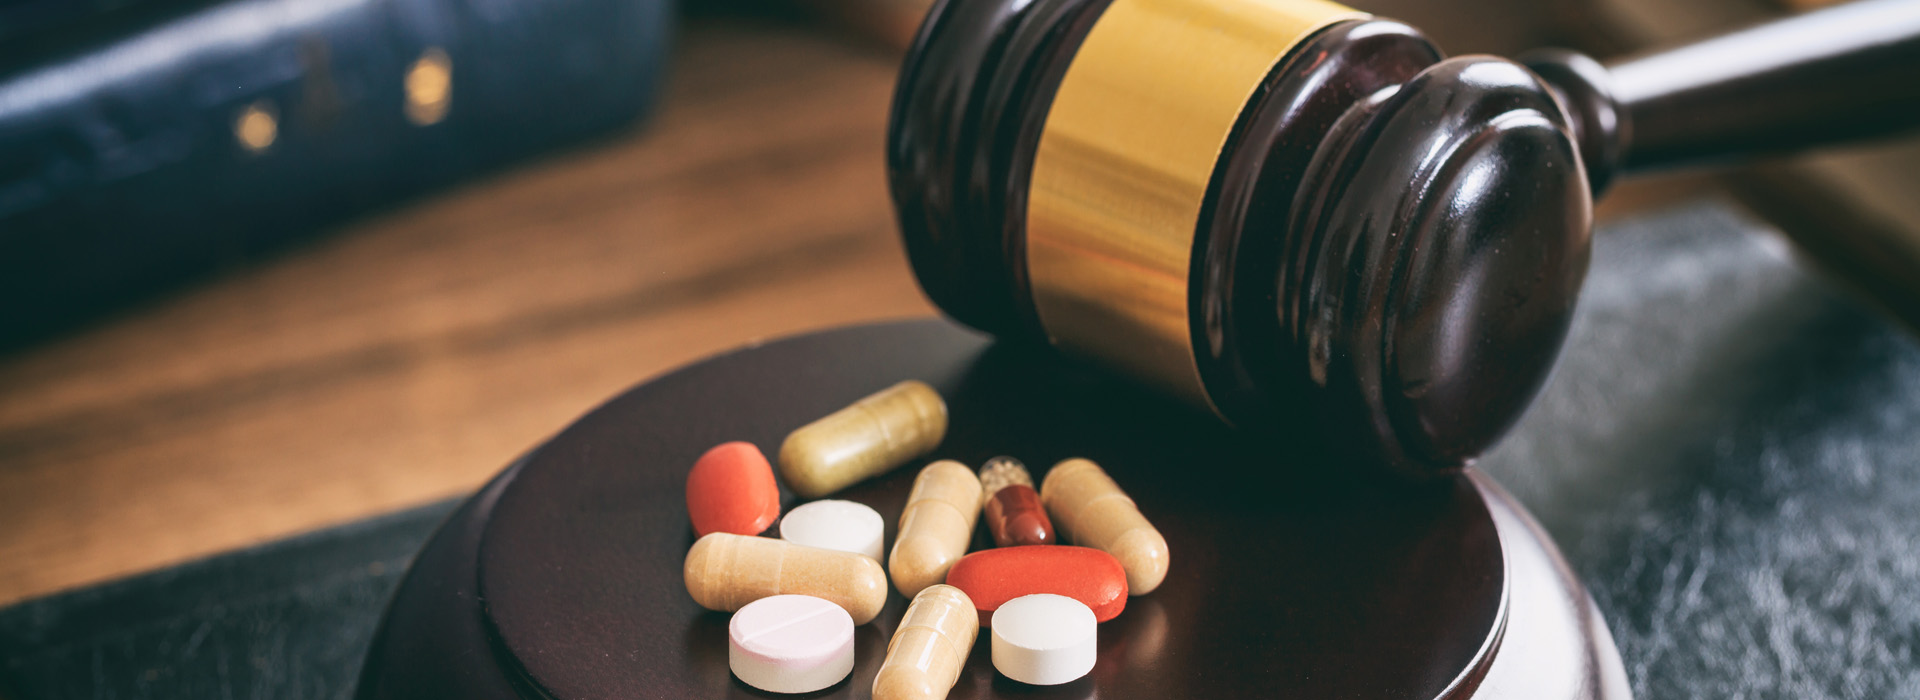 Federal Criminal Defense Attorney - Drug Conspiracy Charges